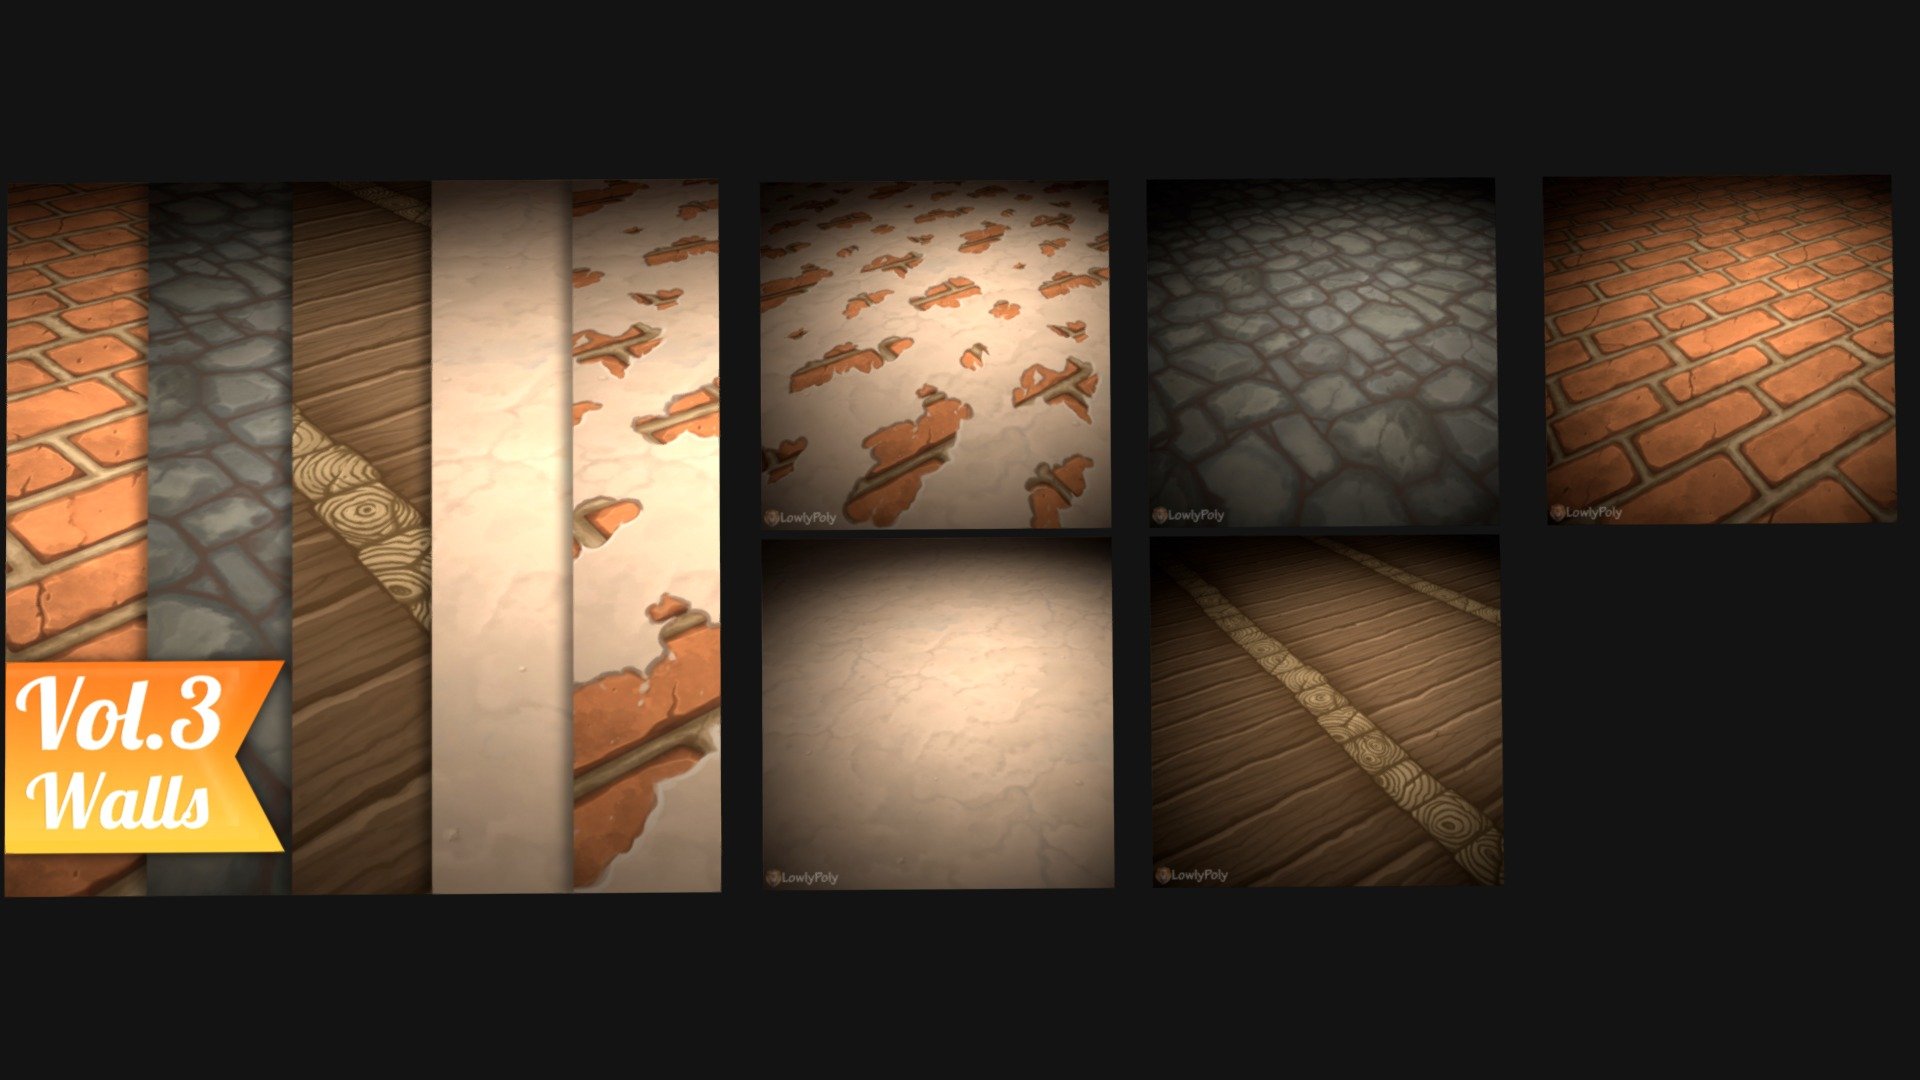 Hand Painted Texture Pack - Vol.3 

Texture set of 5 hand painted, perfectly tillable textures!



Features:

- 5 Hand Painted Texture

- 2048px by 2048px ( easy to downsize to 512*512px )

- PNG format

- Tillable

- Hand Painted

- Normal Map included




*Unity package uncludet - Walls Vol.3 - Hand Painted Texture Pack - 3D model by LowlyPoly 3d model